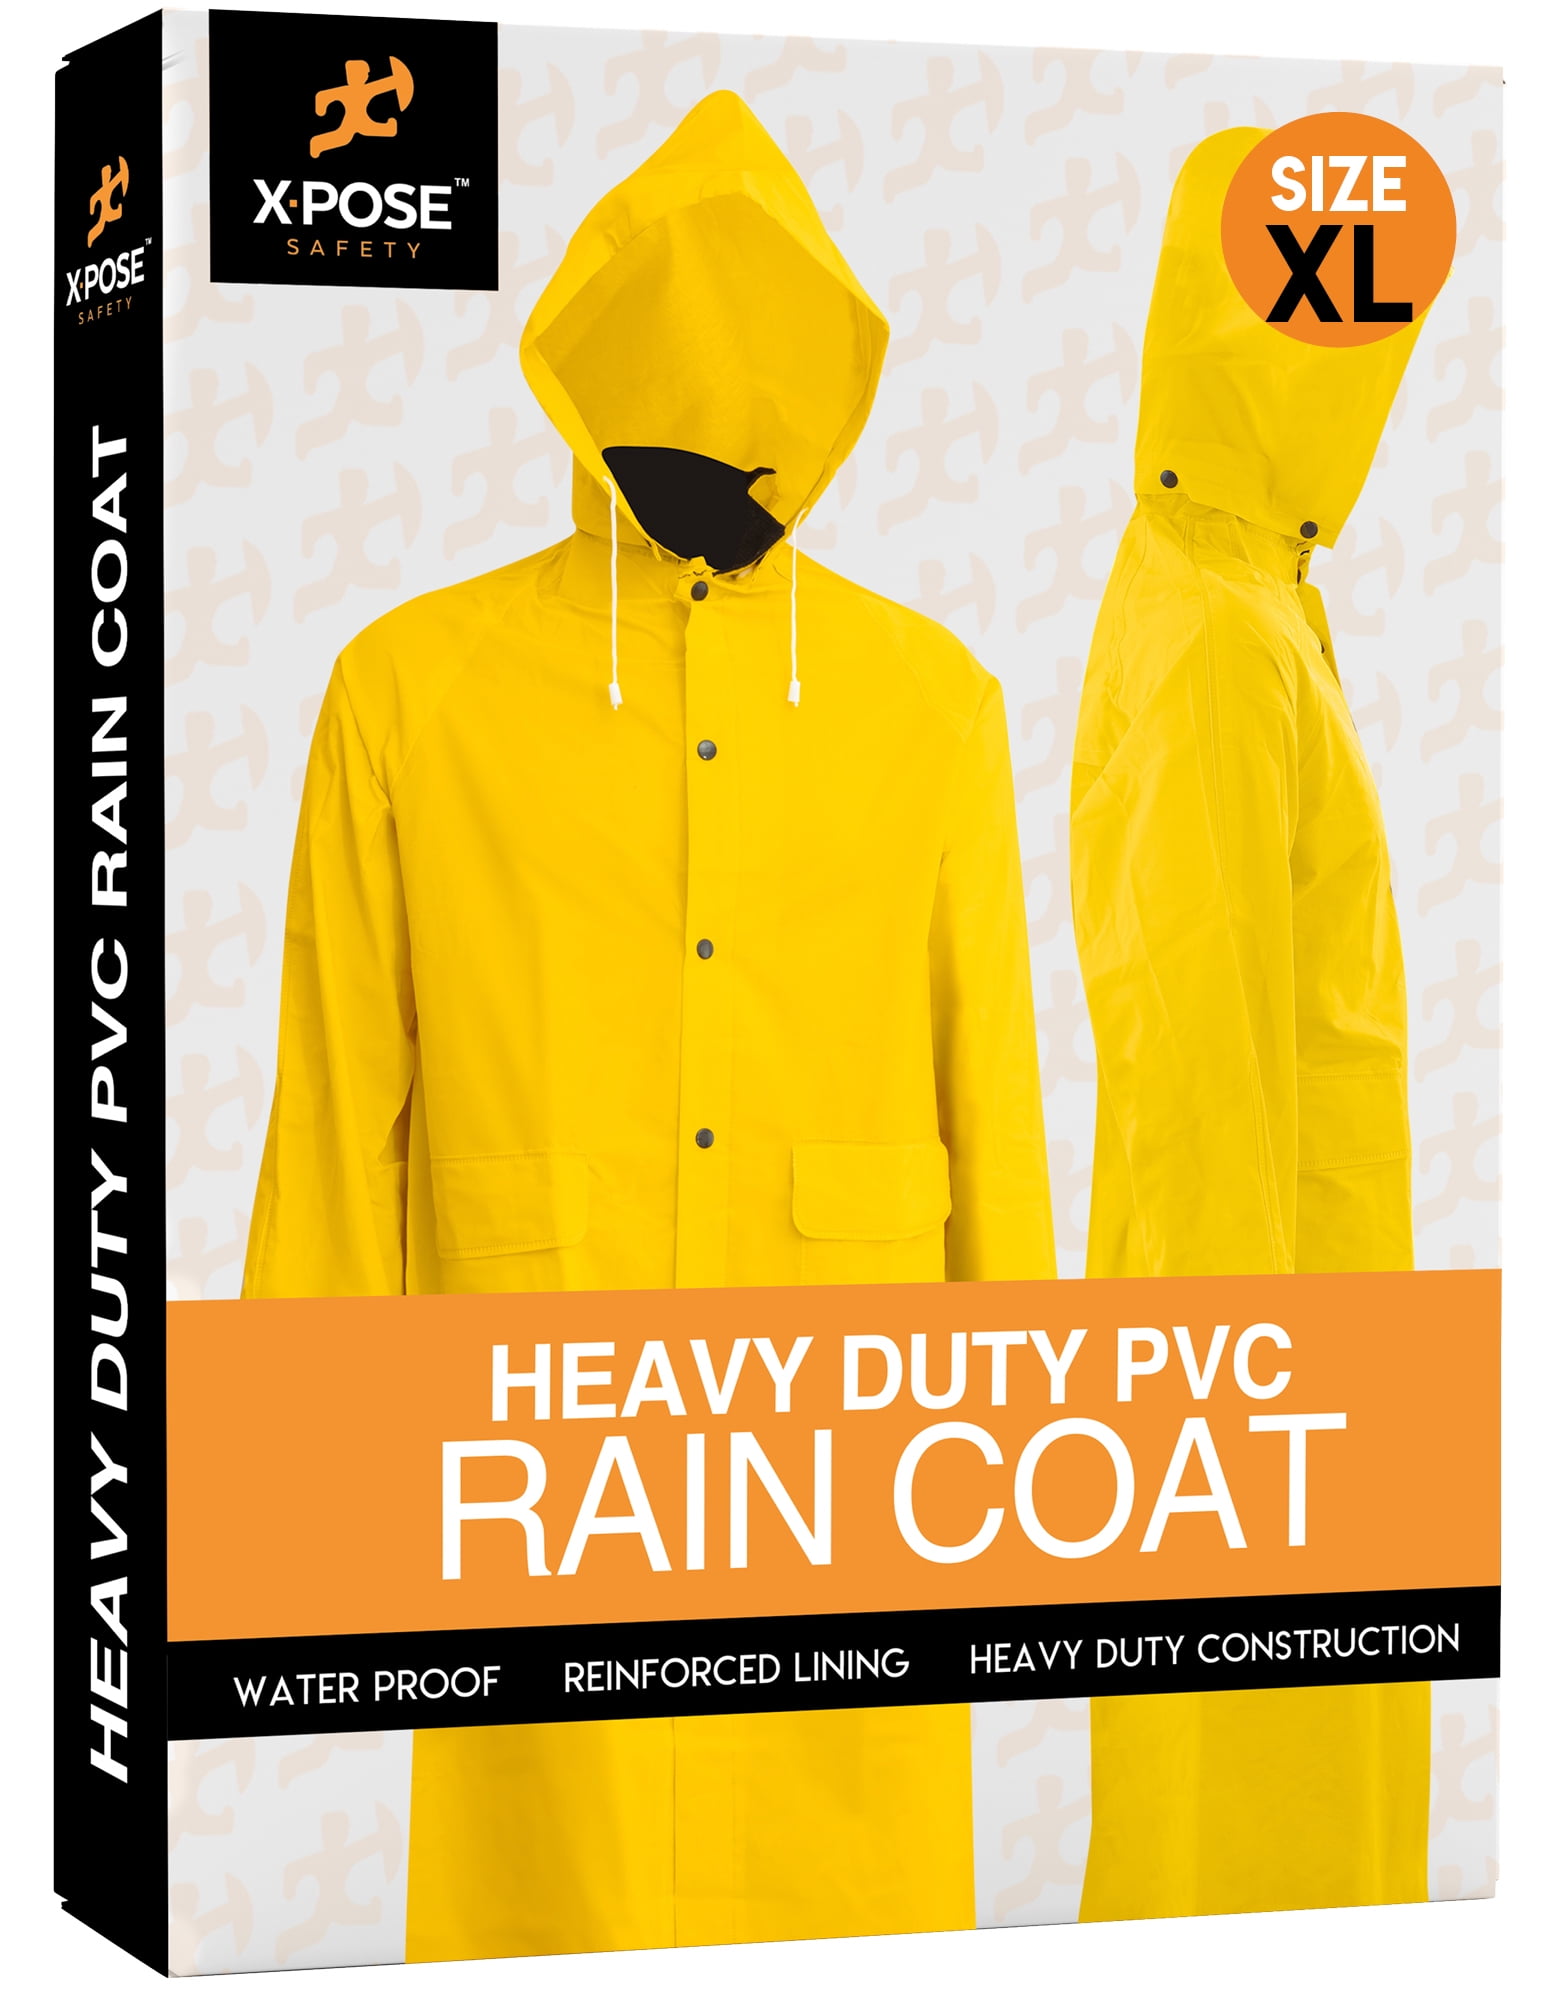 Heavy Duty Yellow Rain Coat – .35mm PVC 48in Raincoat Jacket with  Detachable Hood - Waterproof Slicker - Storm Weather, Raining, Fishing, Wet  Work Conditions - XL - by Xpose Safety 